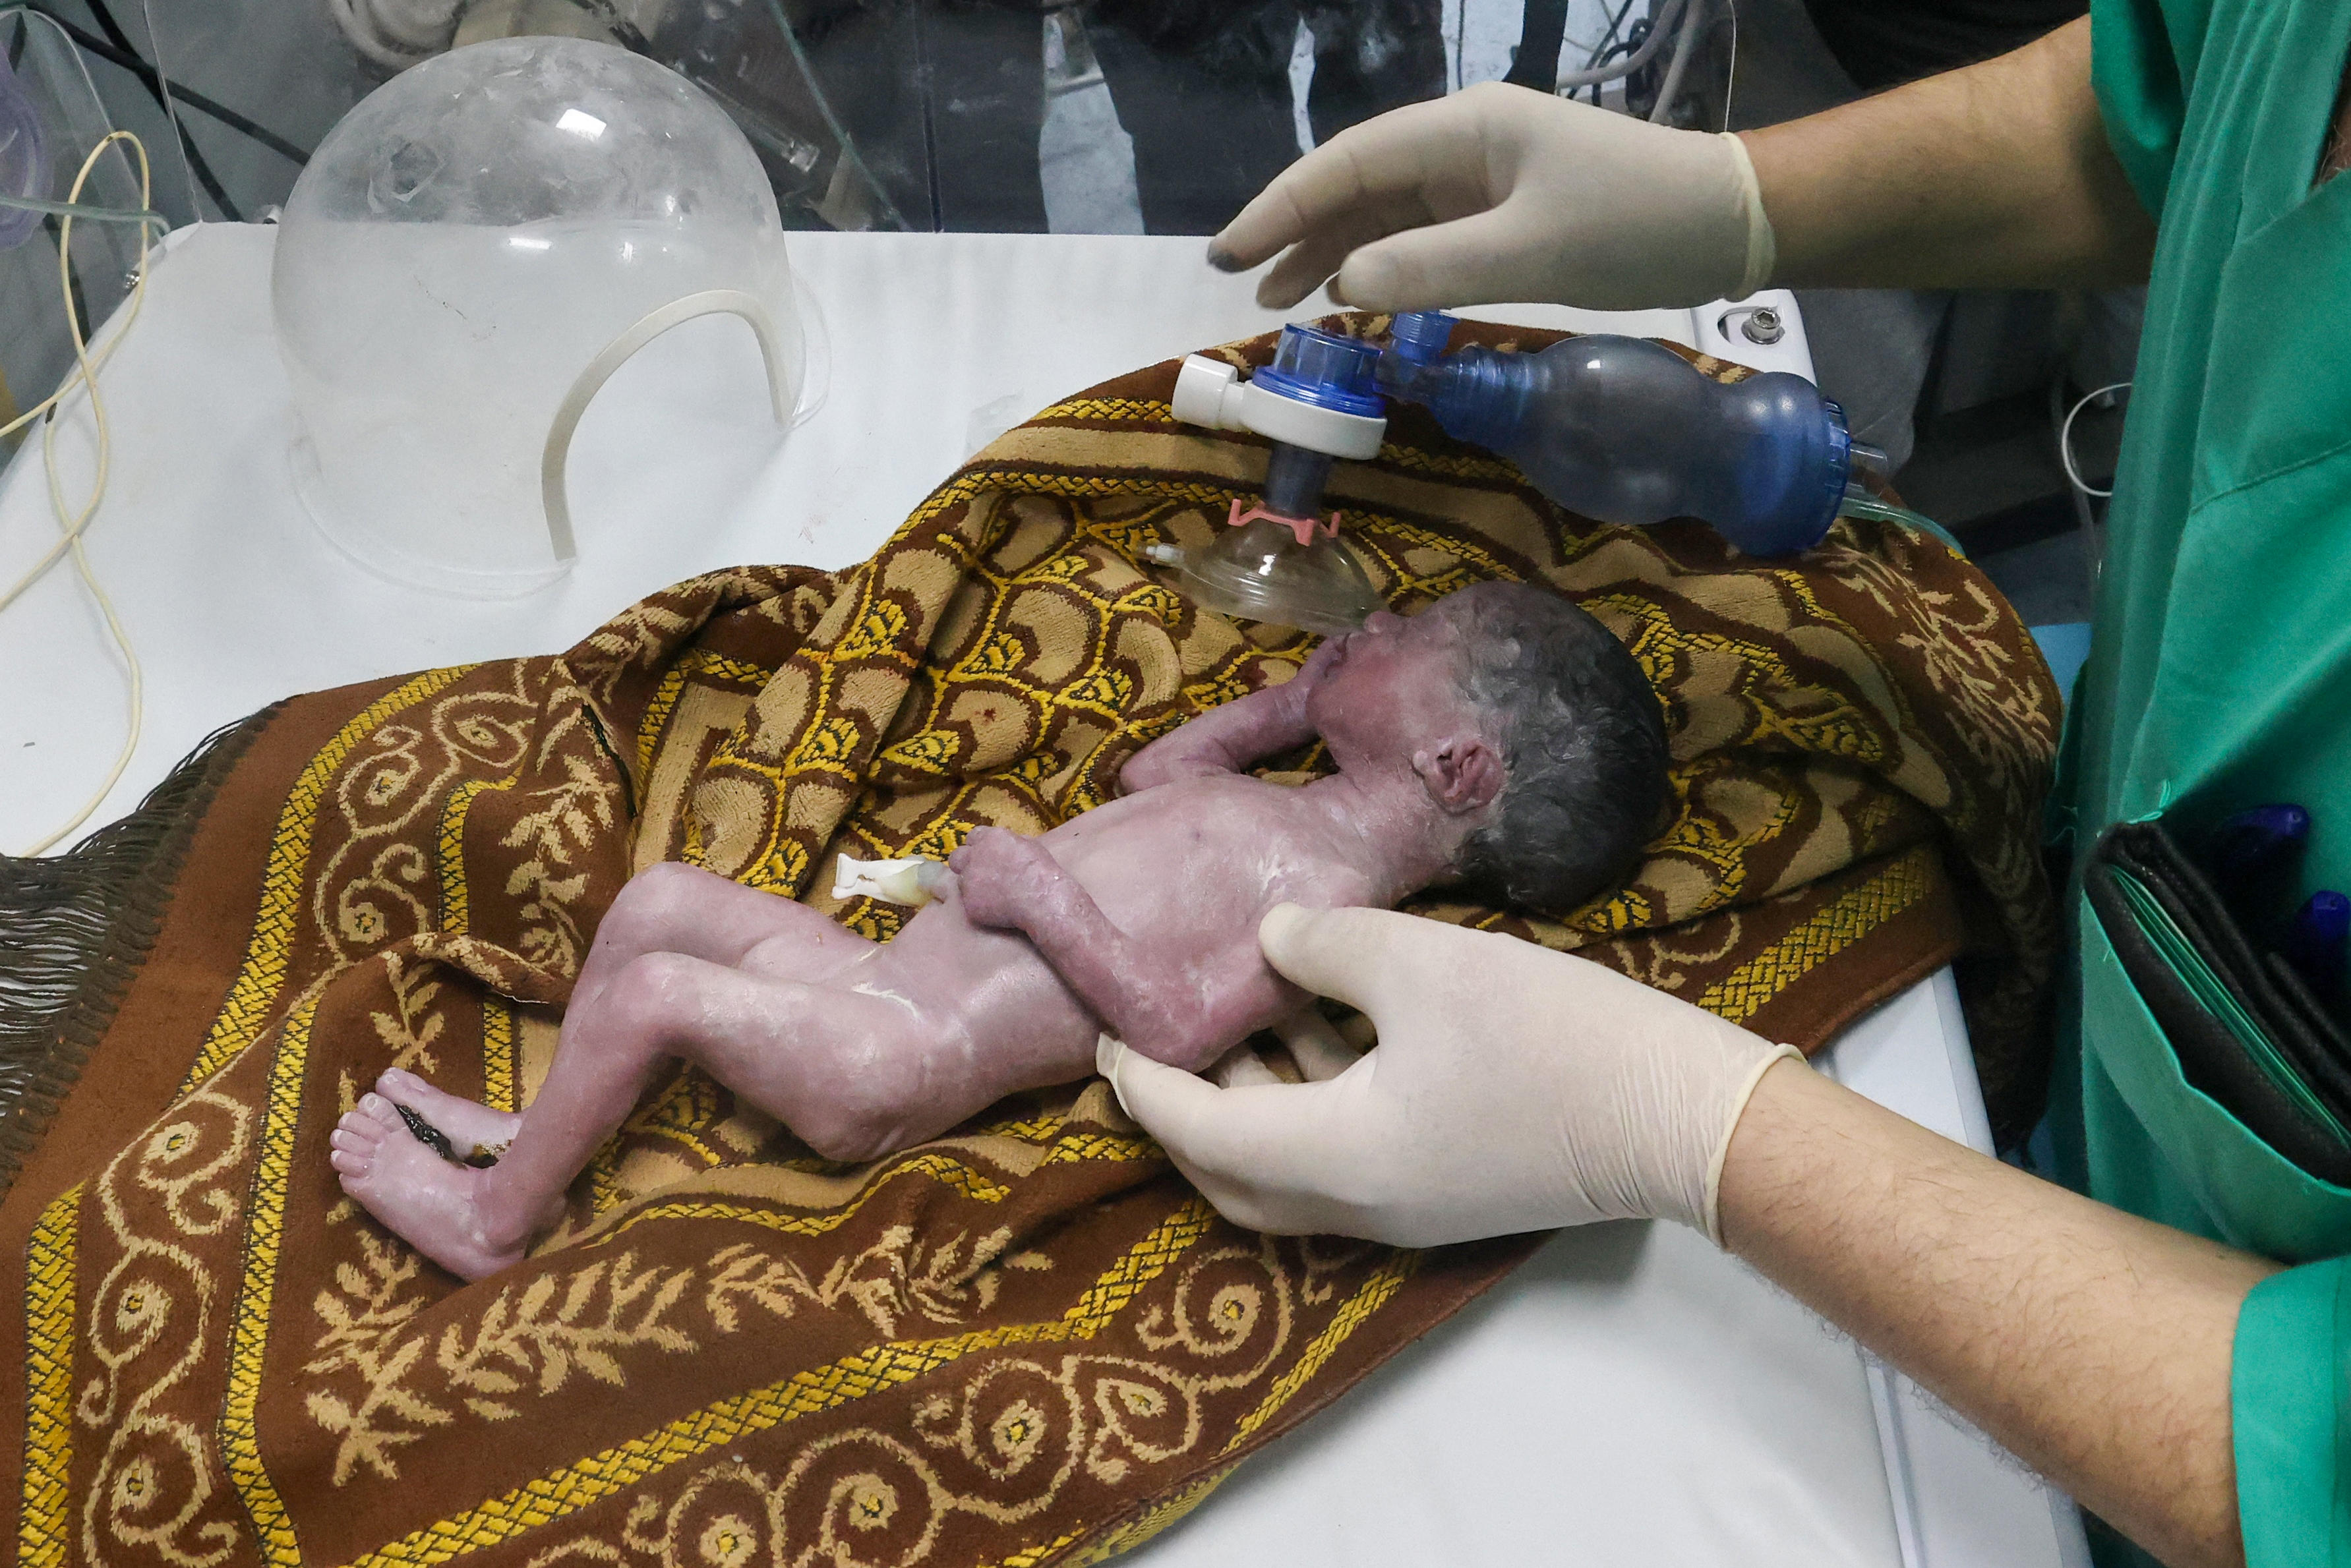 baby saved from dying mother's womb after israeli airstrike named in her honor